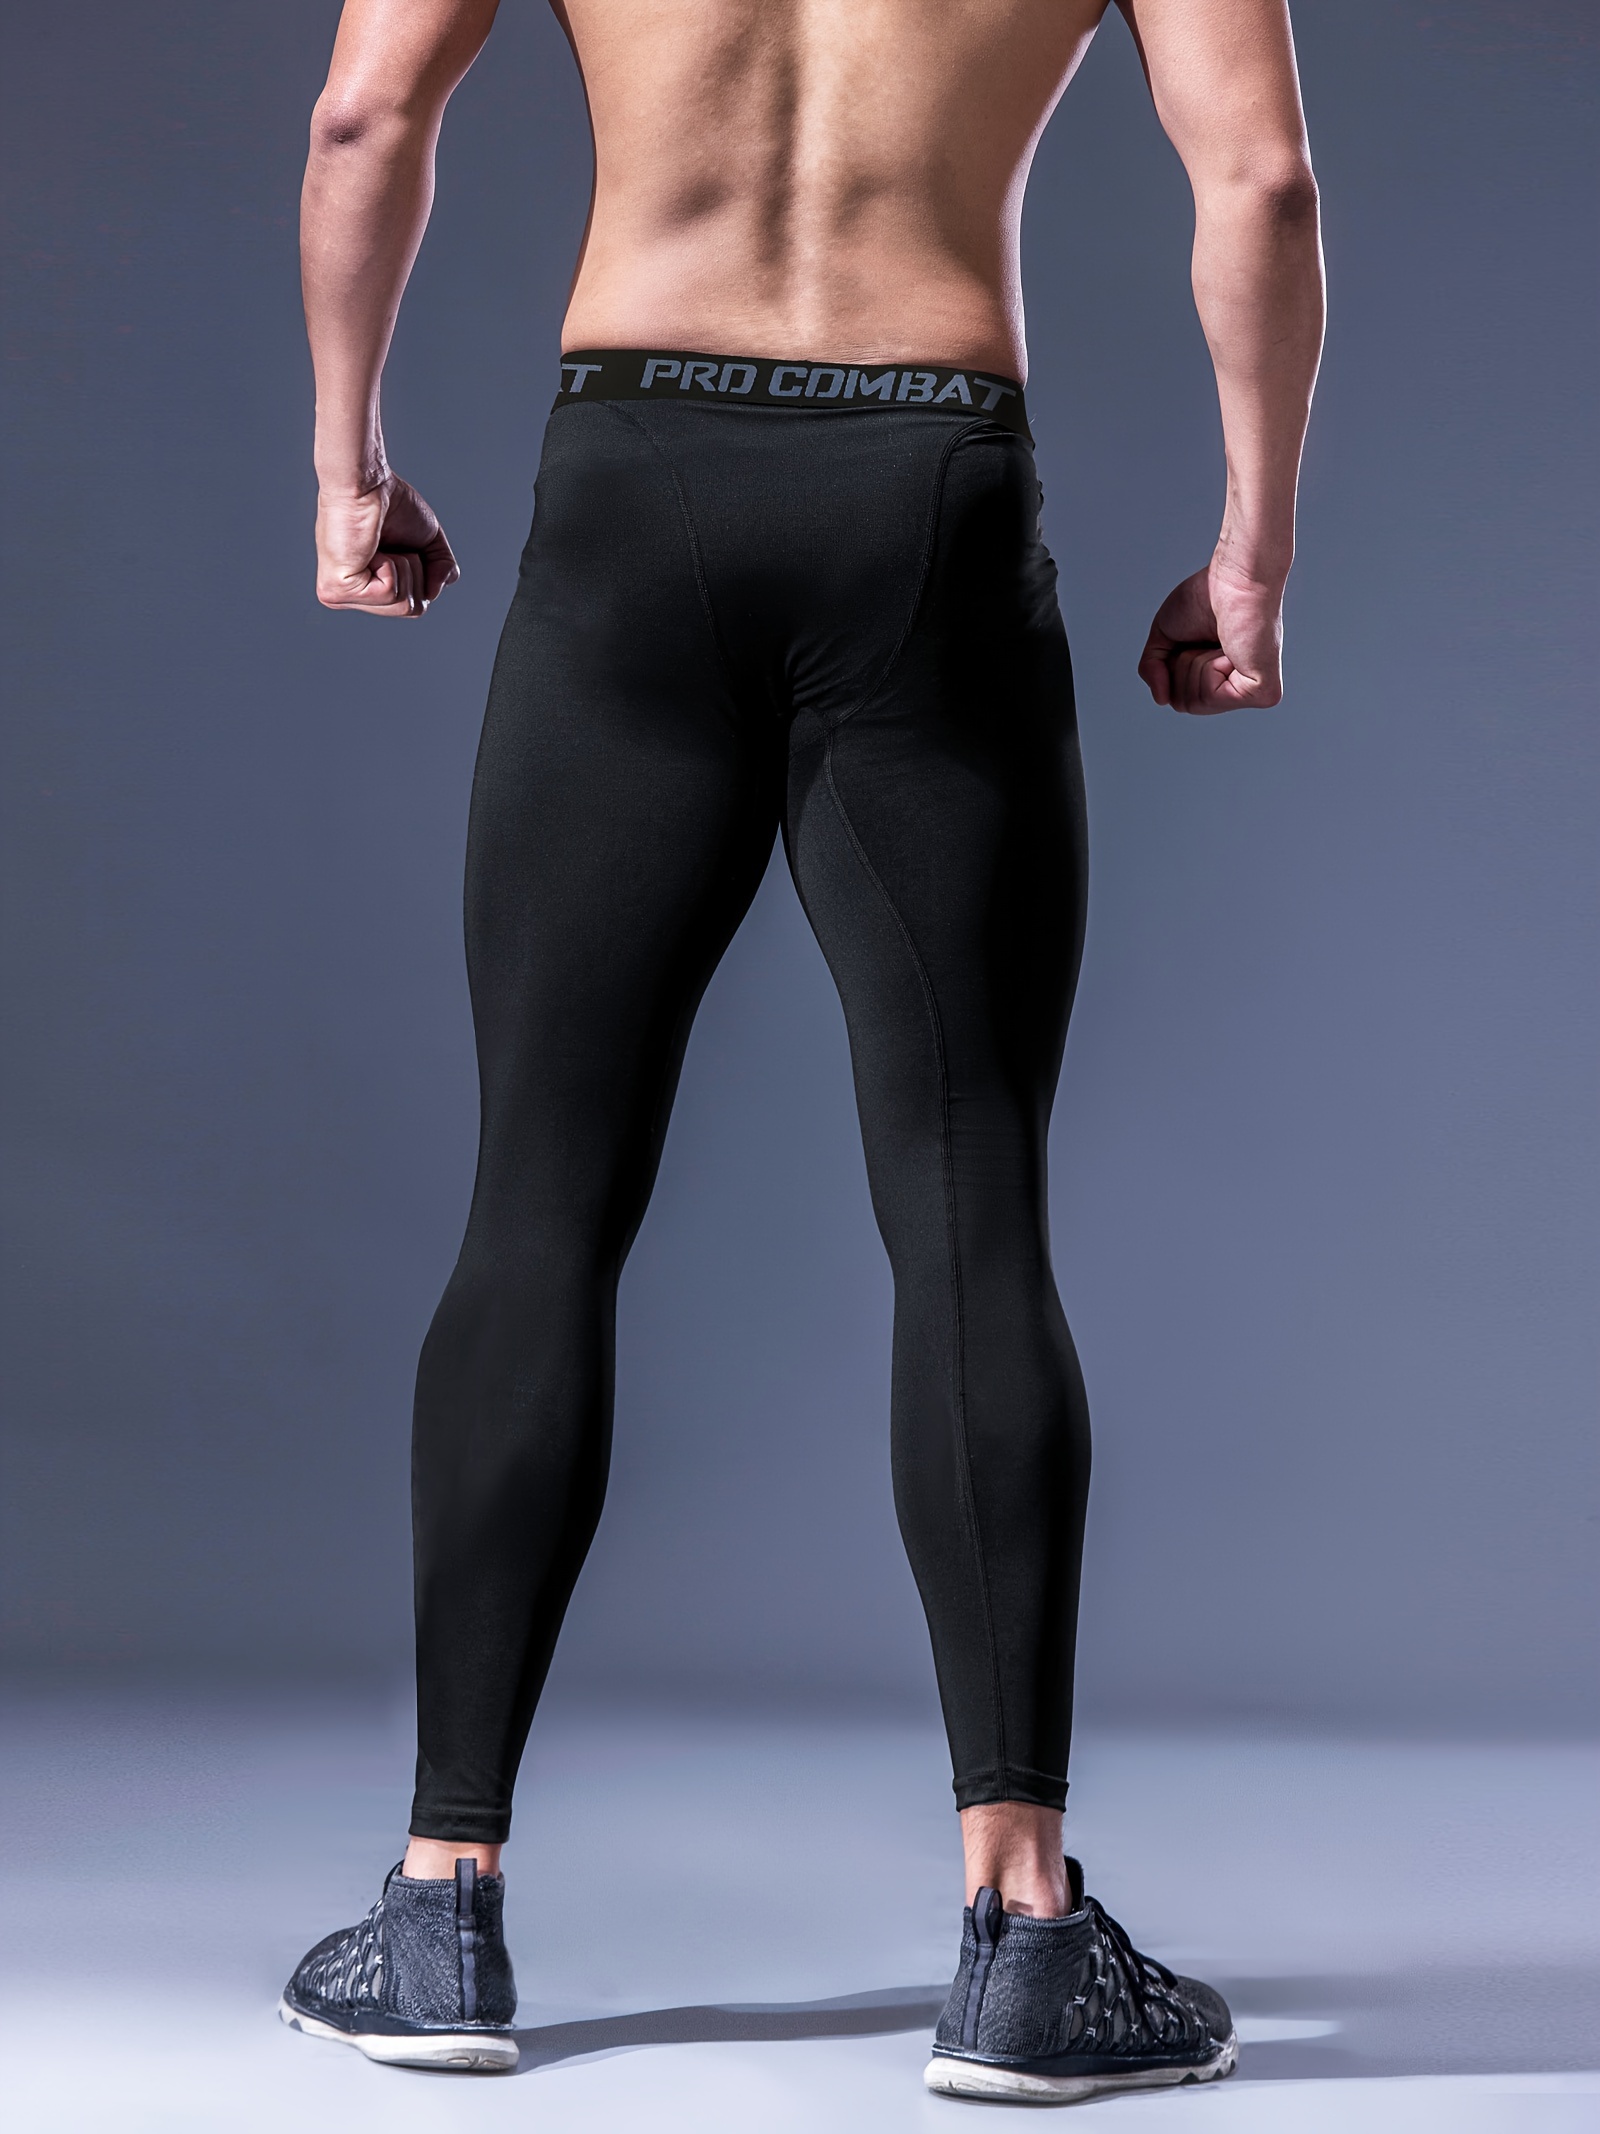 Stibadium Men's Athletic Compression Pants Baselayer Quick Dry Sports  Running Gym Workout Tights Leggings 